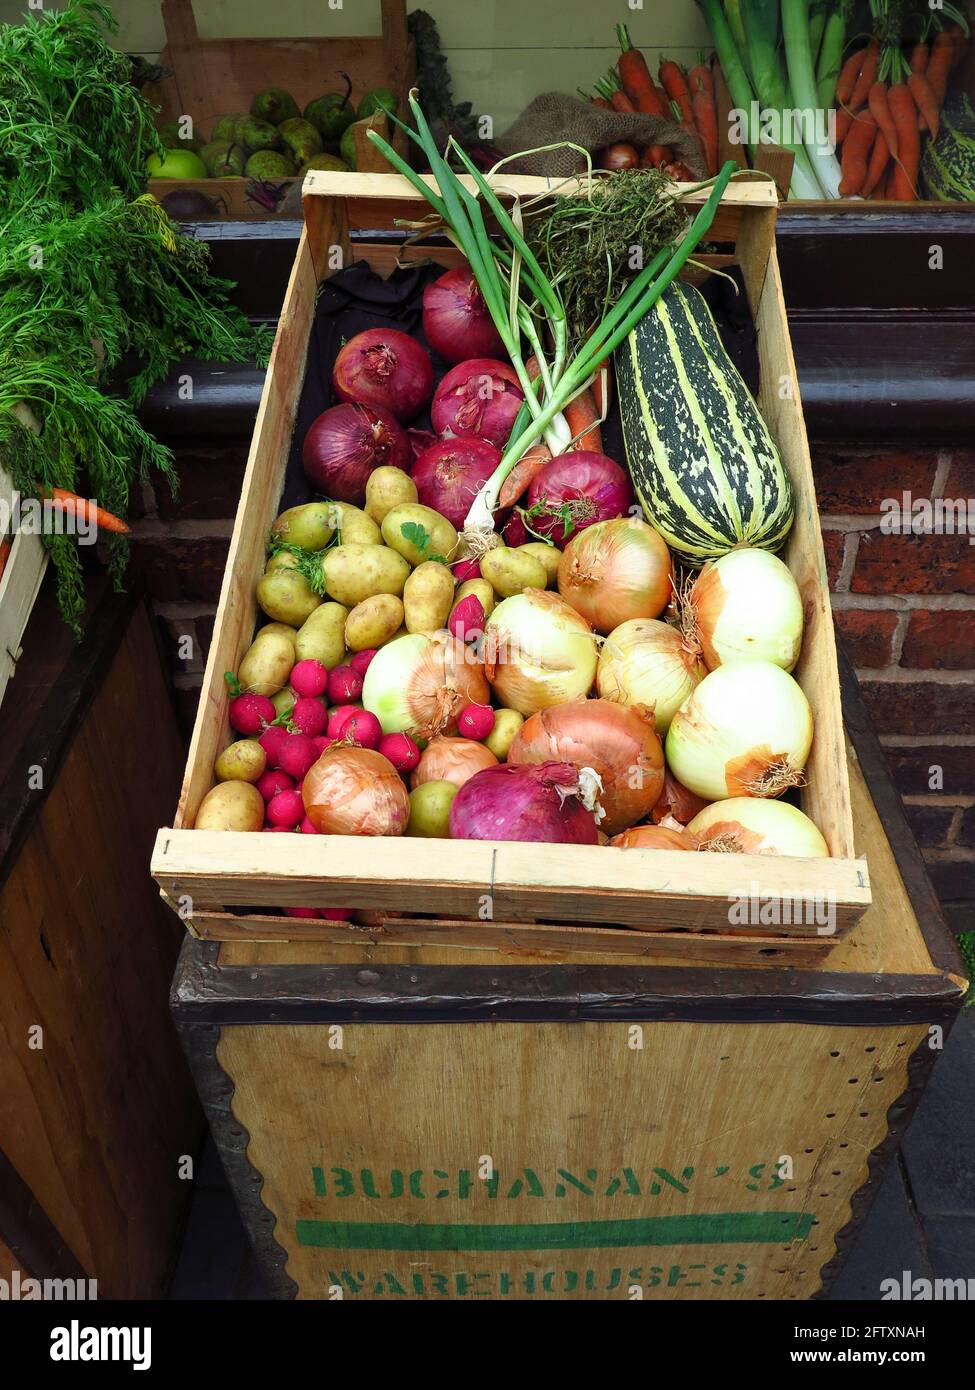 Old fashioned style greengrocers display of fresh vegetables outside shop Stock Photo